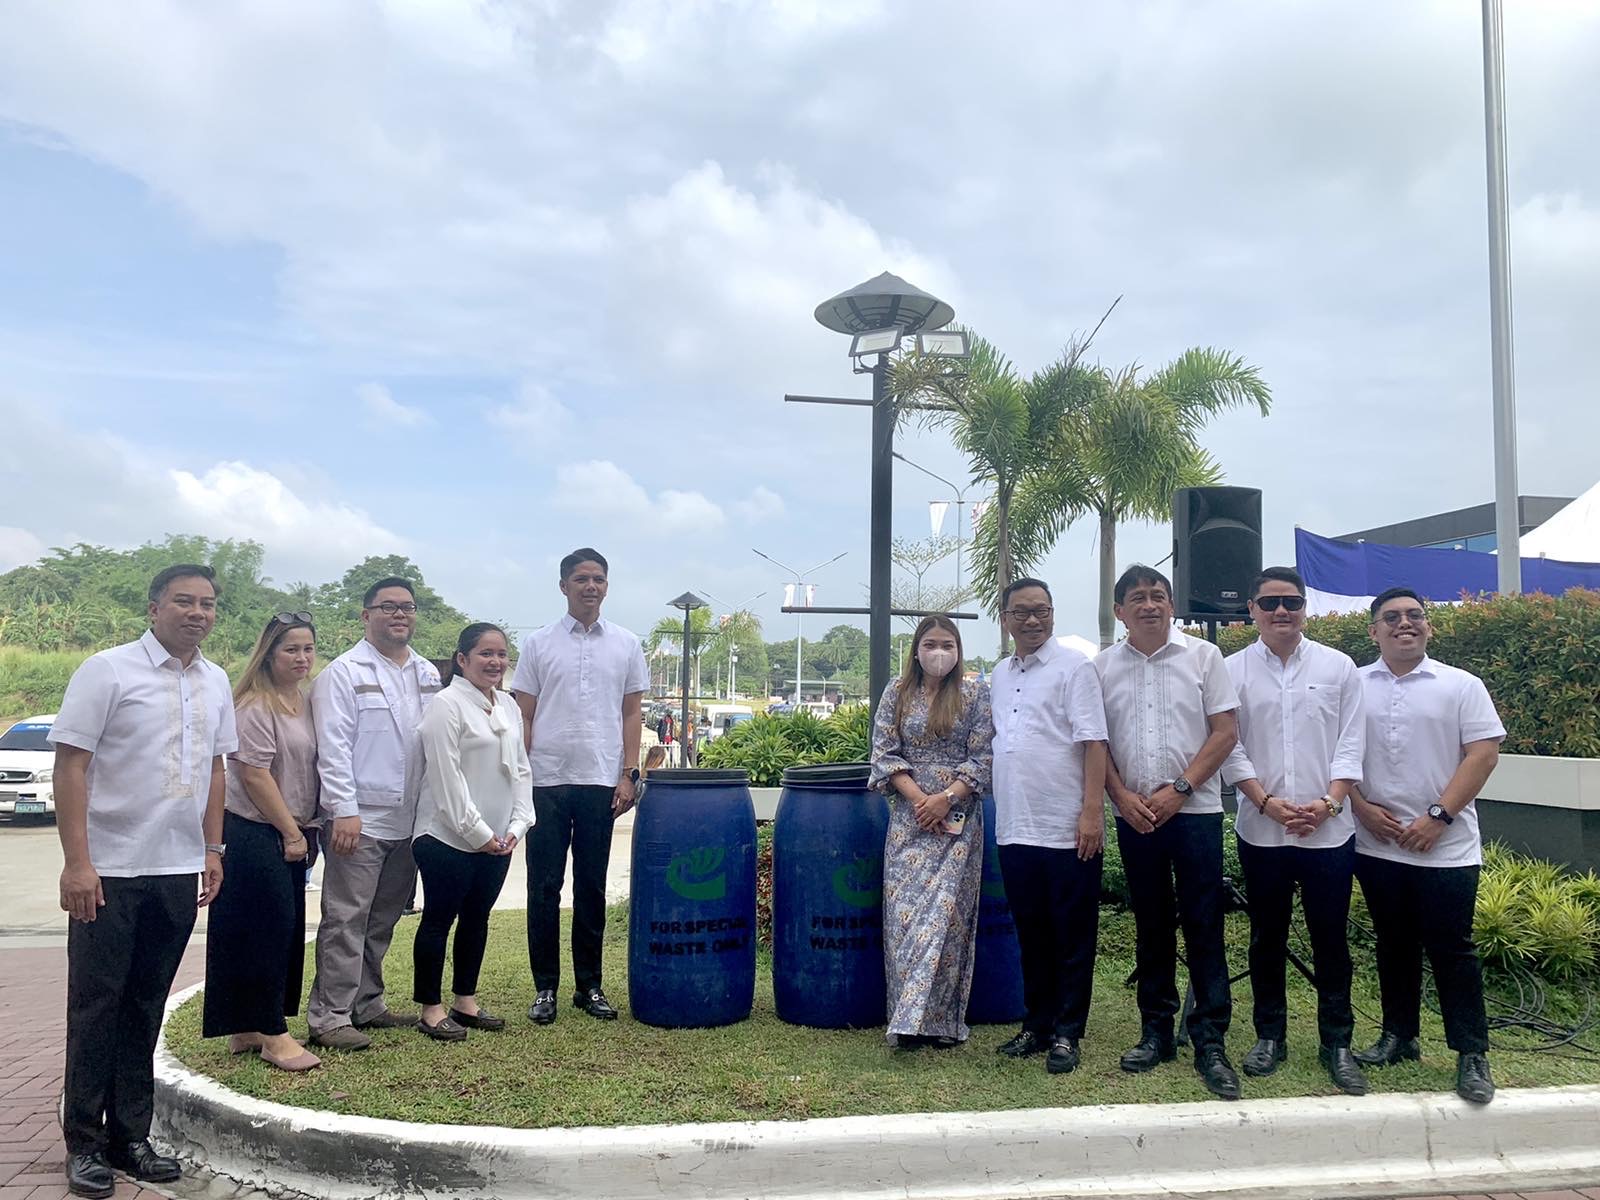 Cleanway donated hazwaste drums to LGU Silang